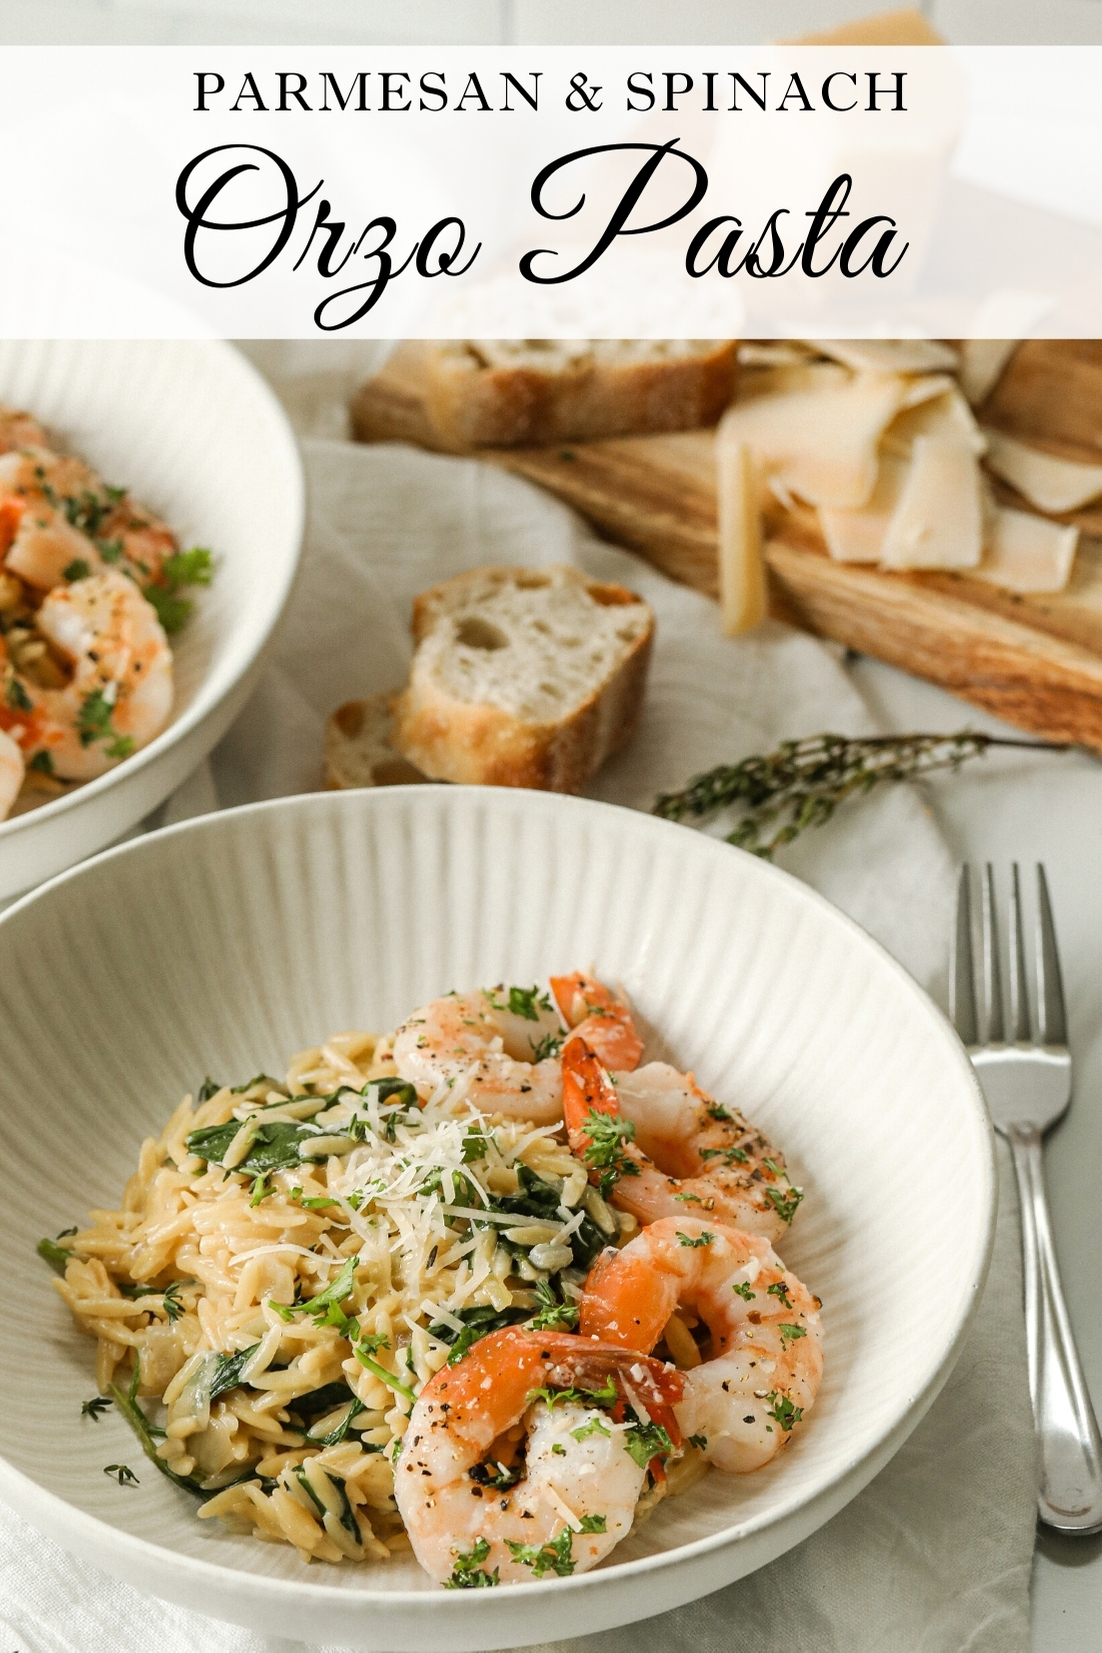 Parmesan and Spinach Orzo Pasta recipe